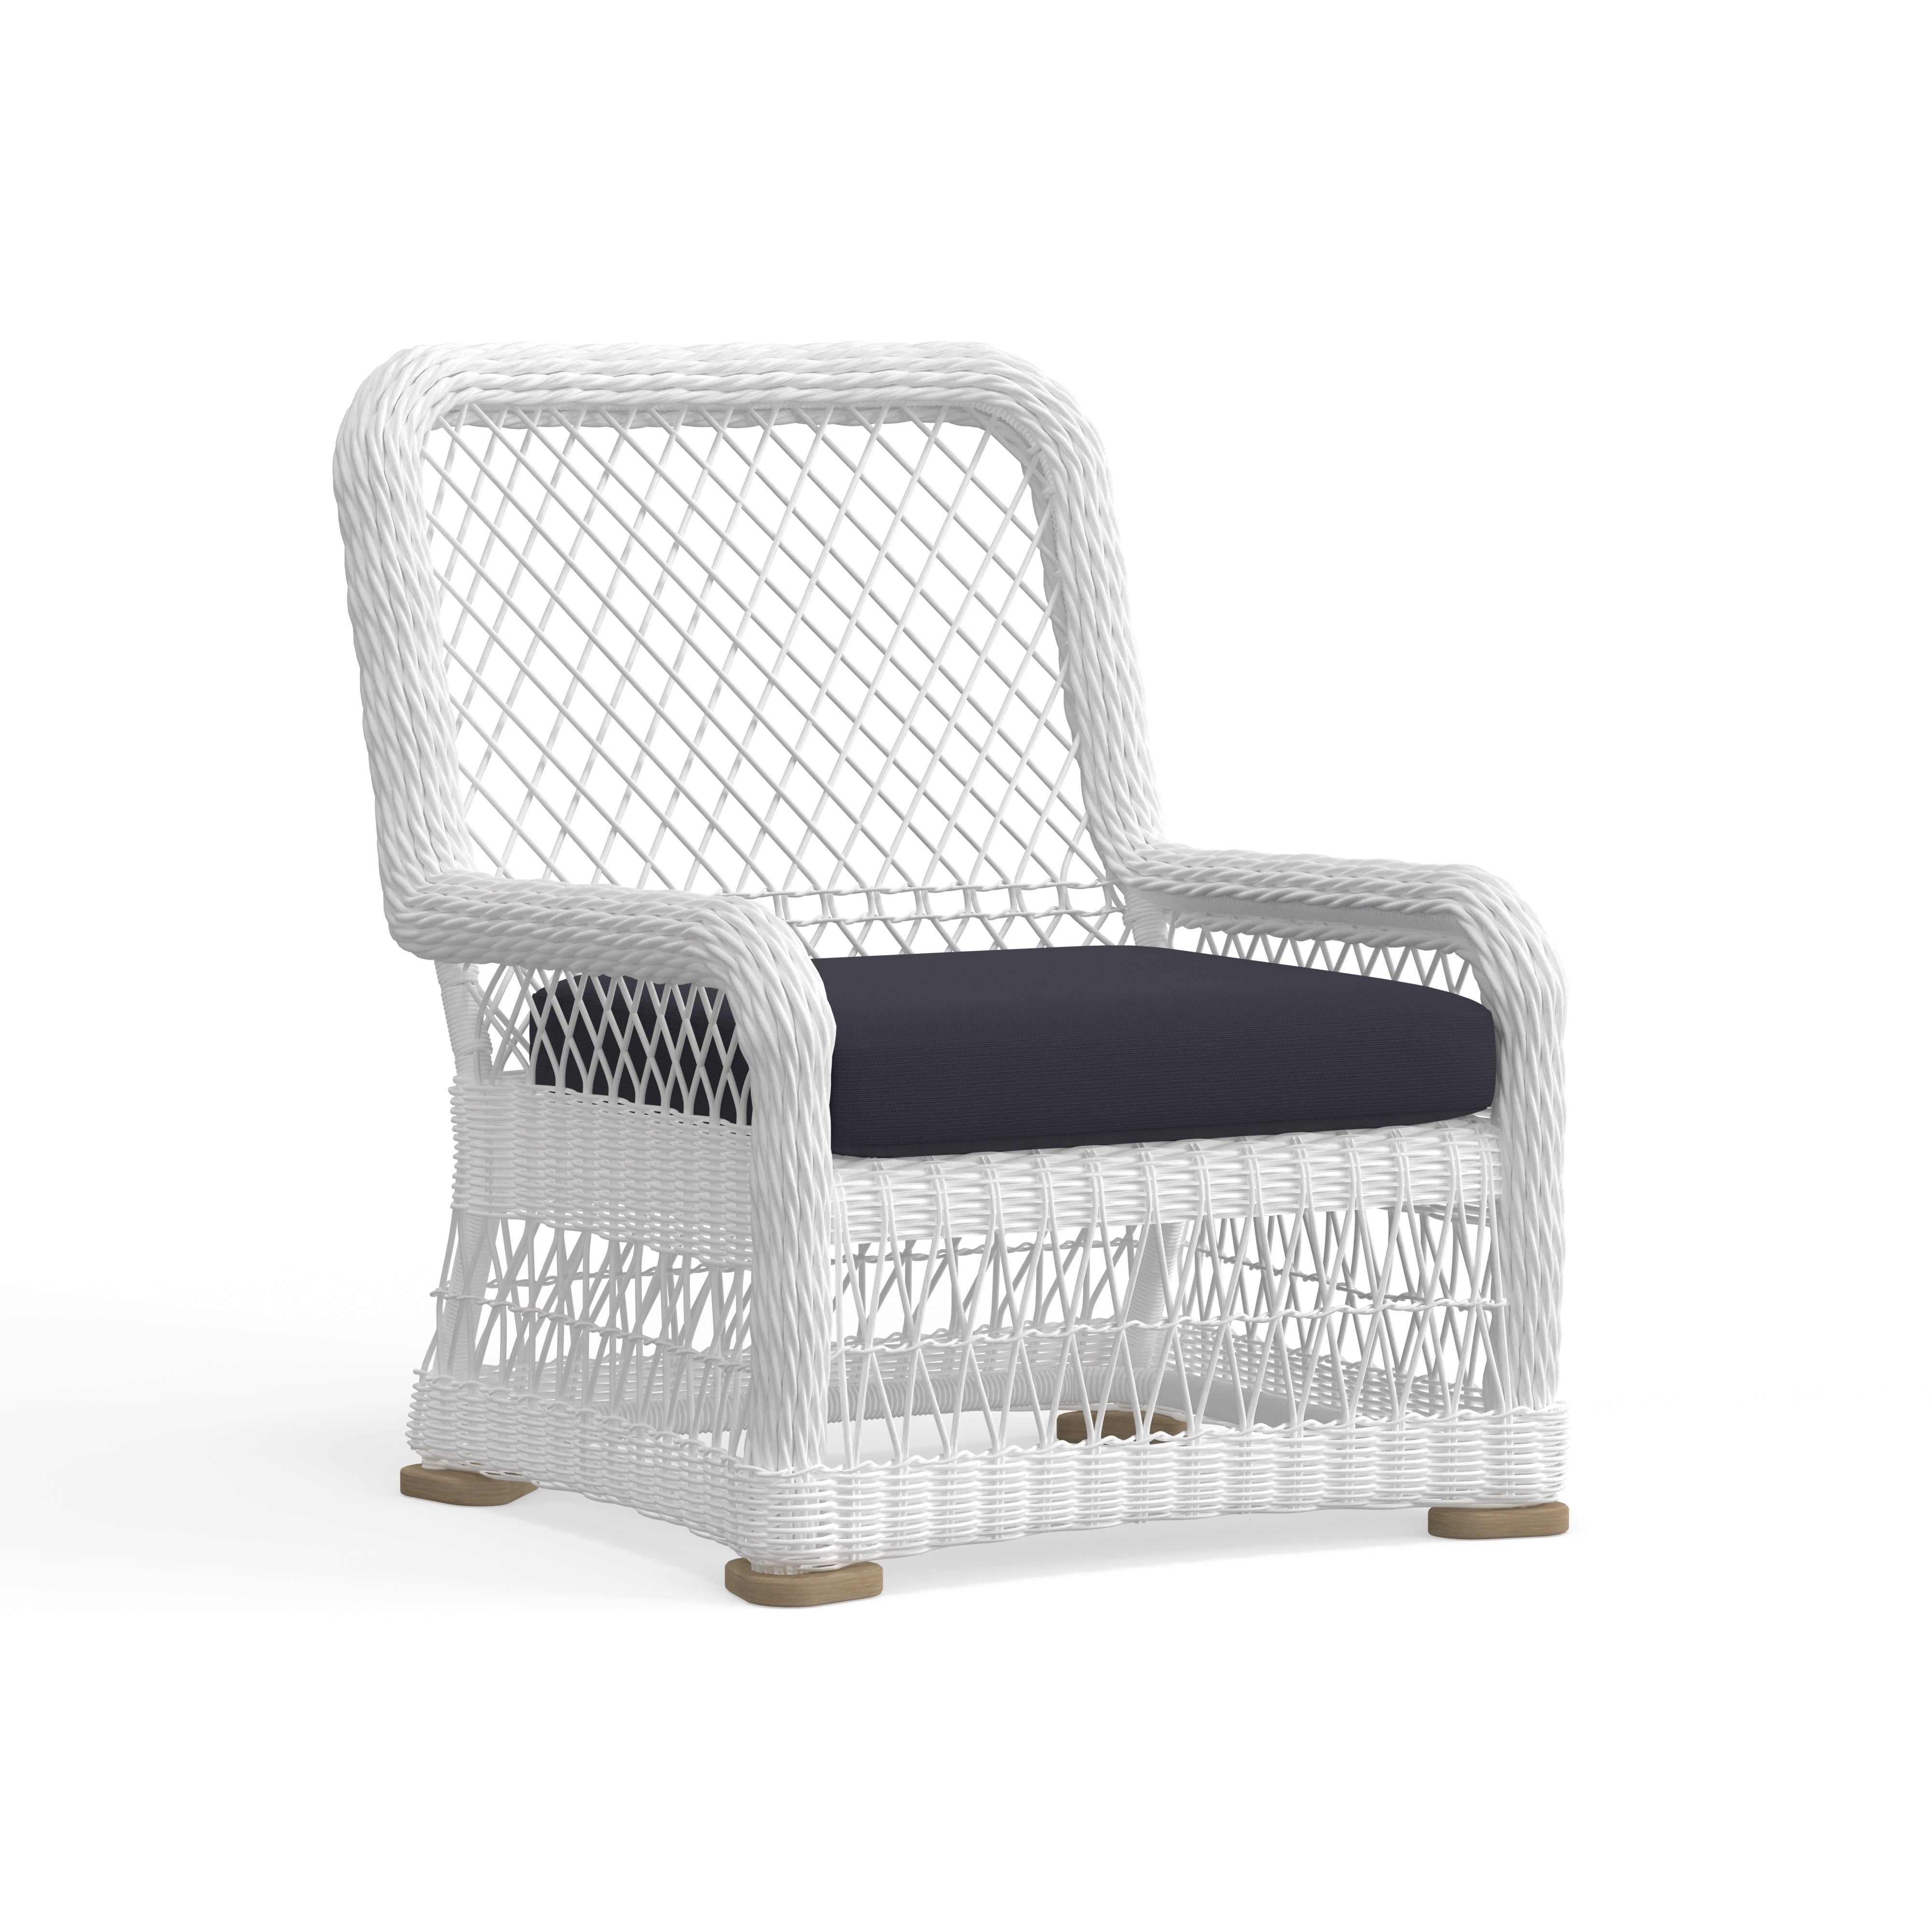 Outdoor Wicker Chair For Porch